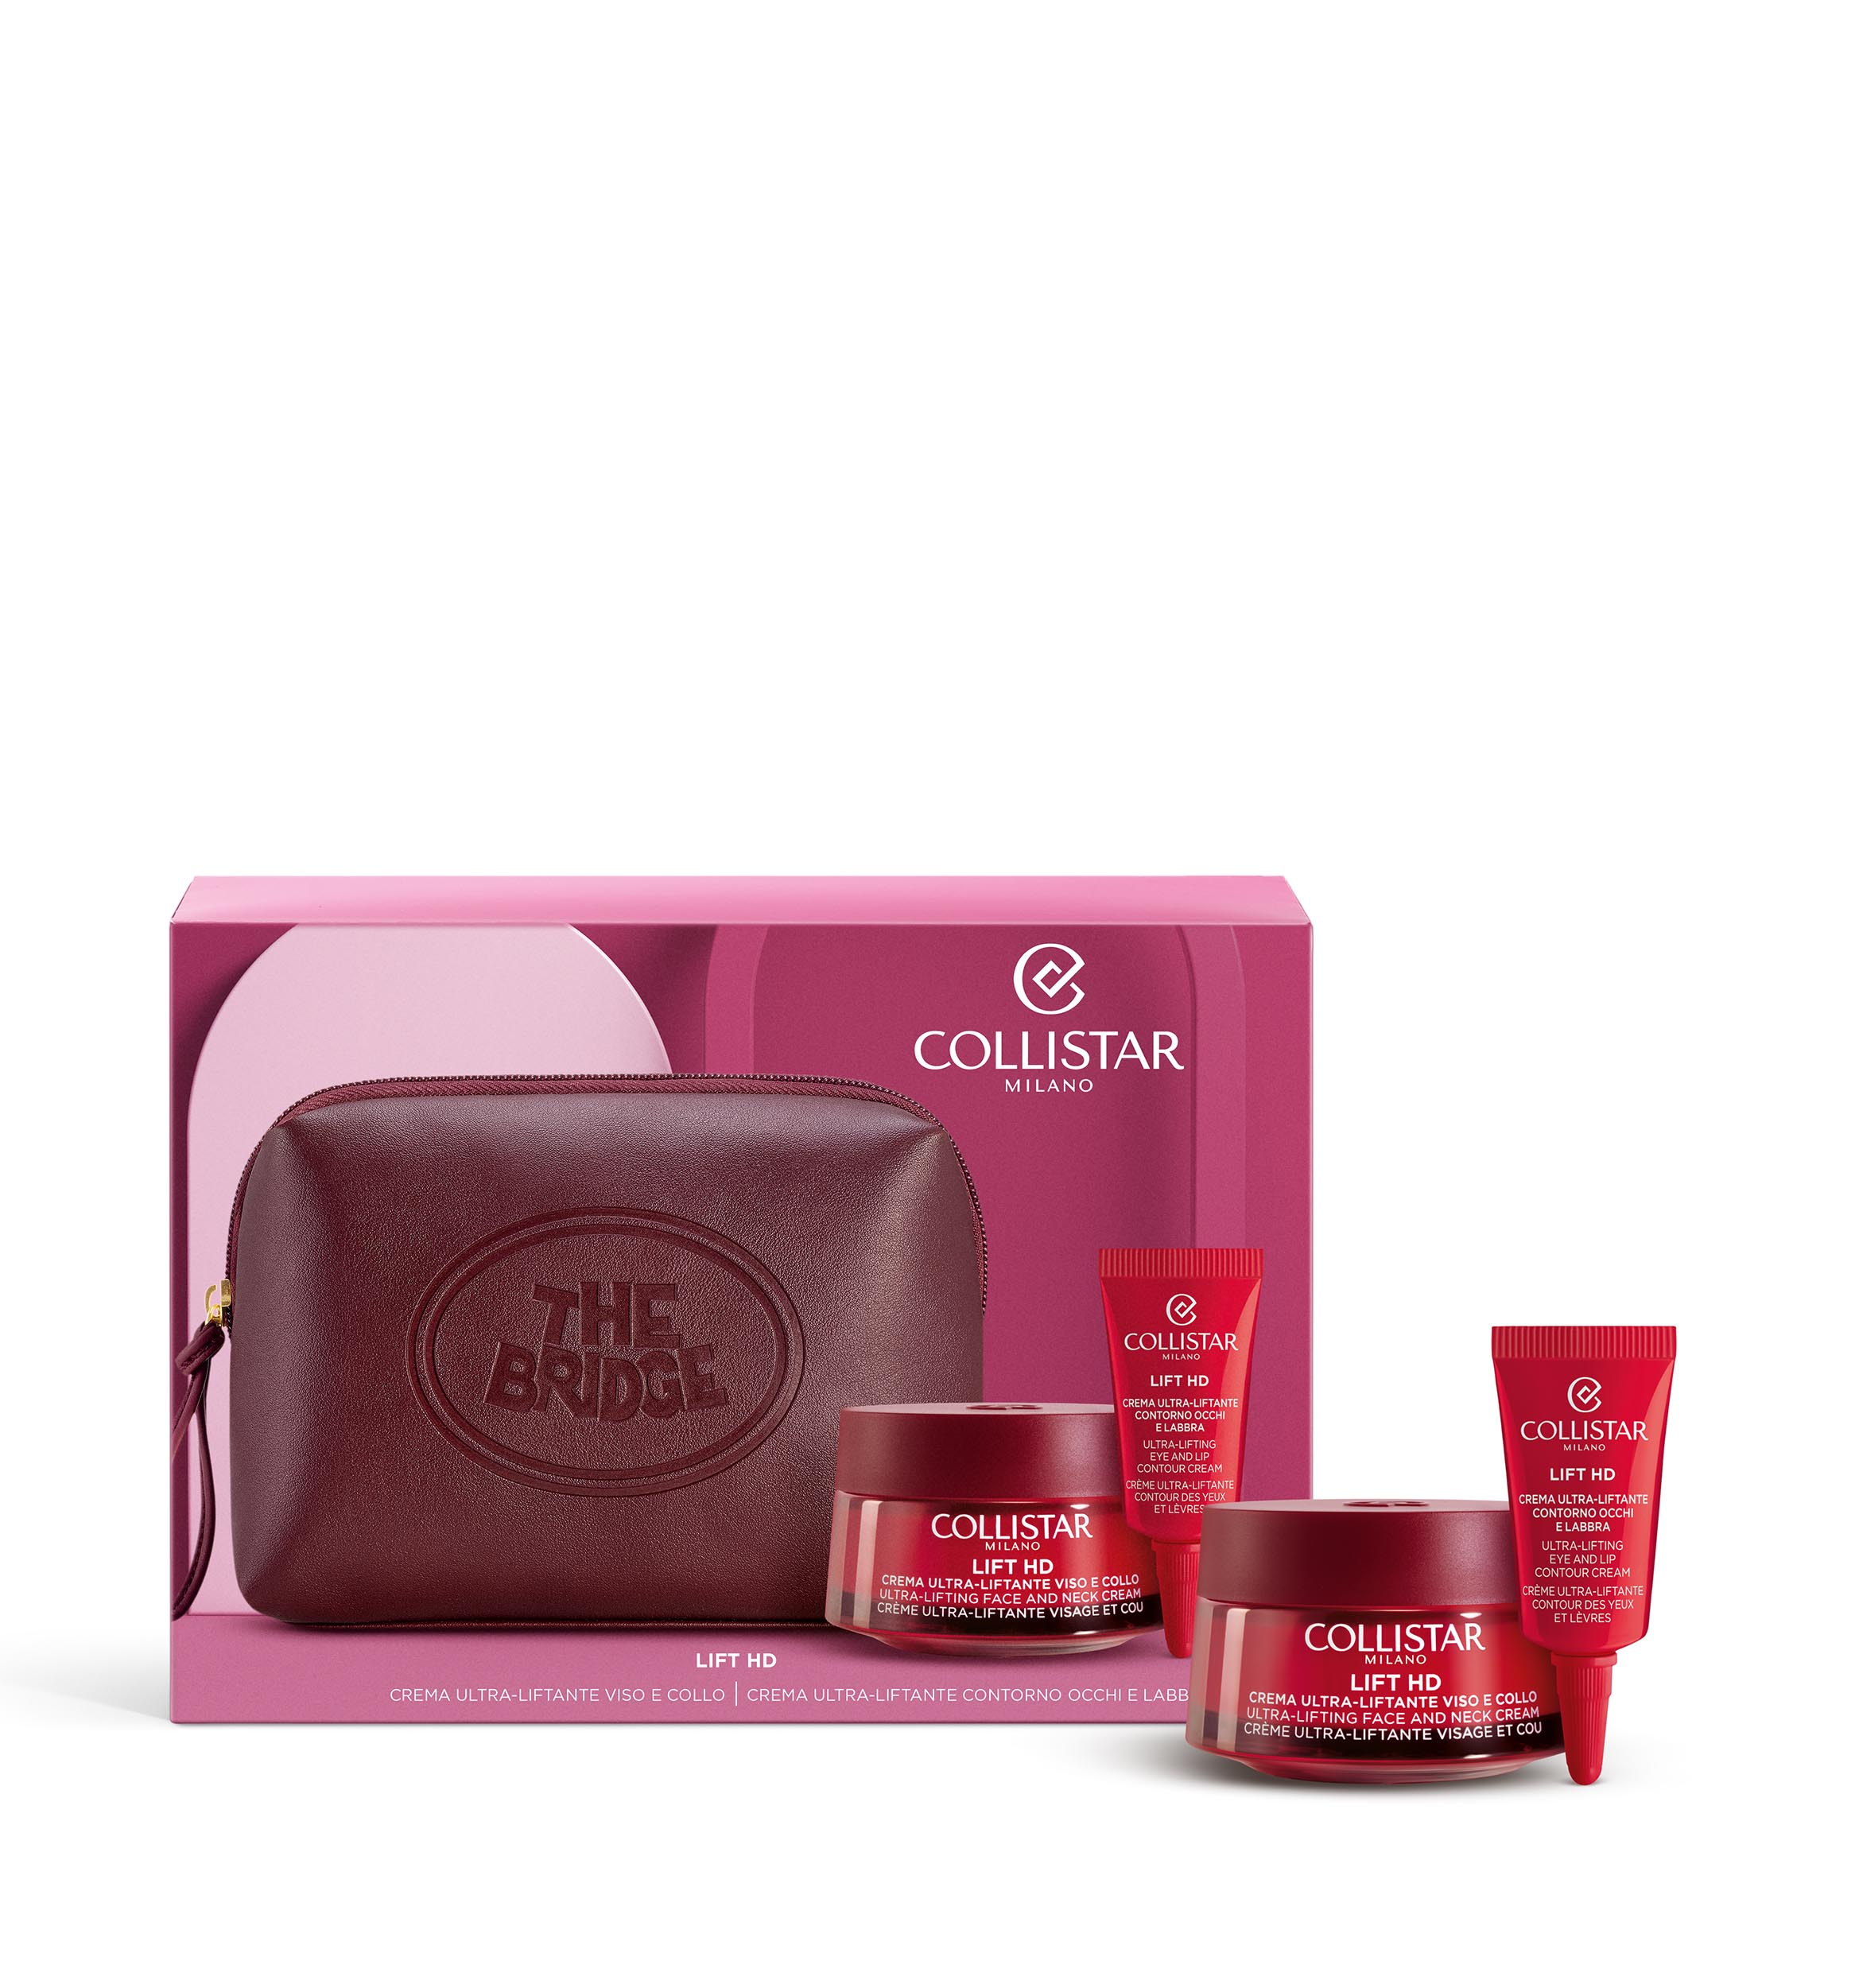 LIFT HD ULTRA-LIFTING FACE AND NECK CREAM SET - Face | Collistar - Shop Online Ufficiale